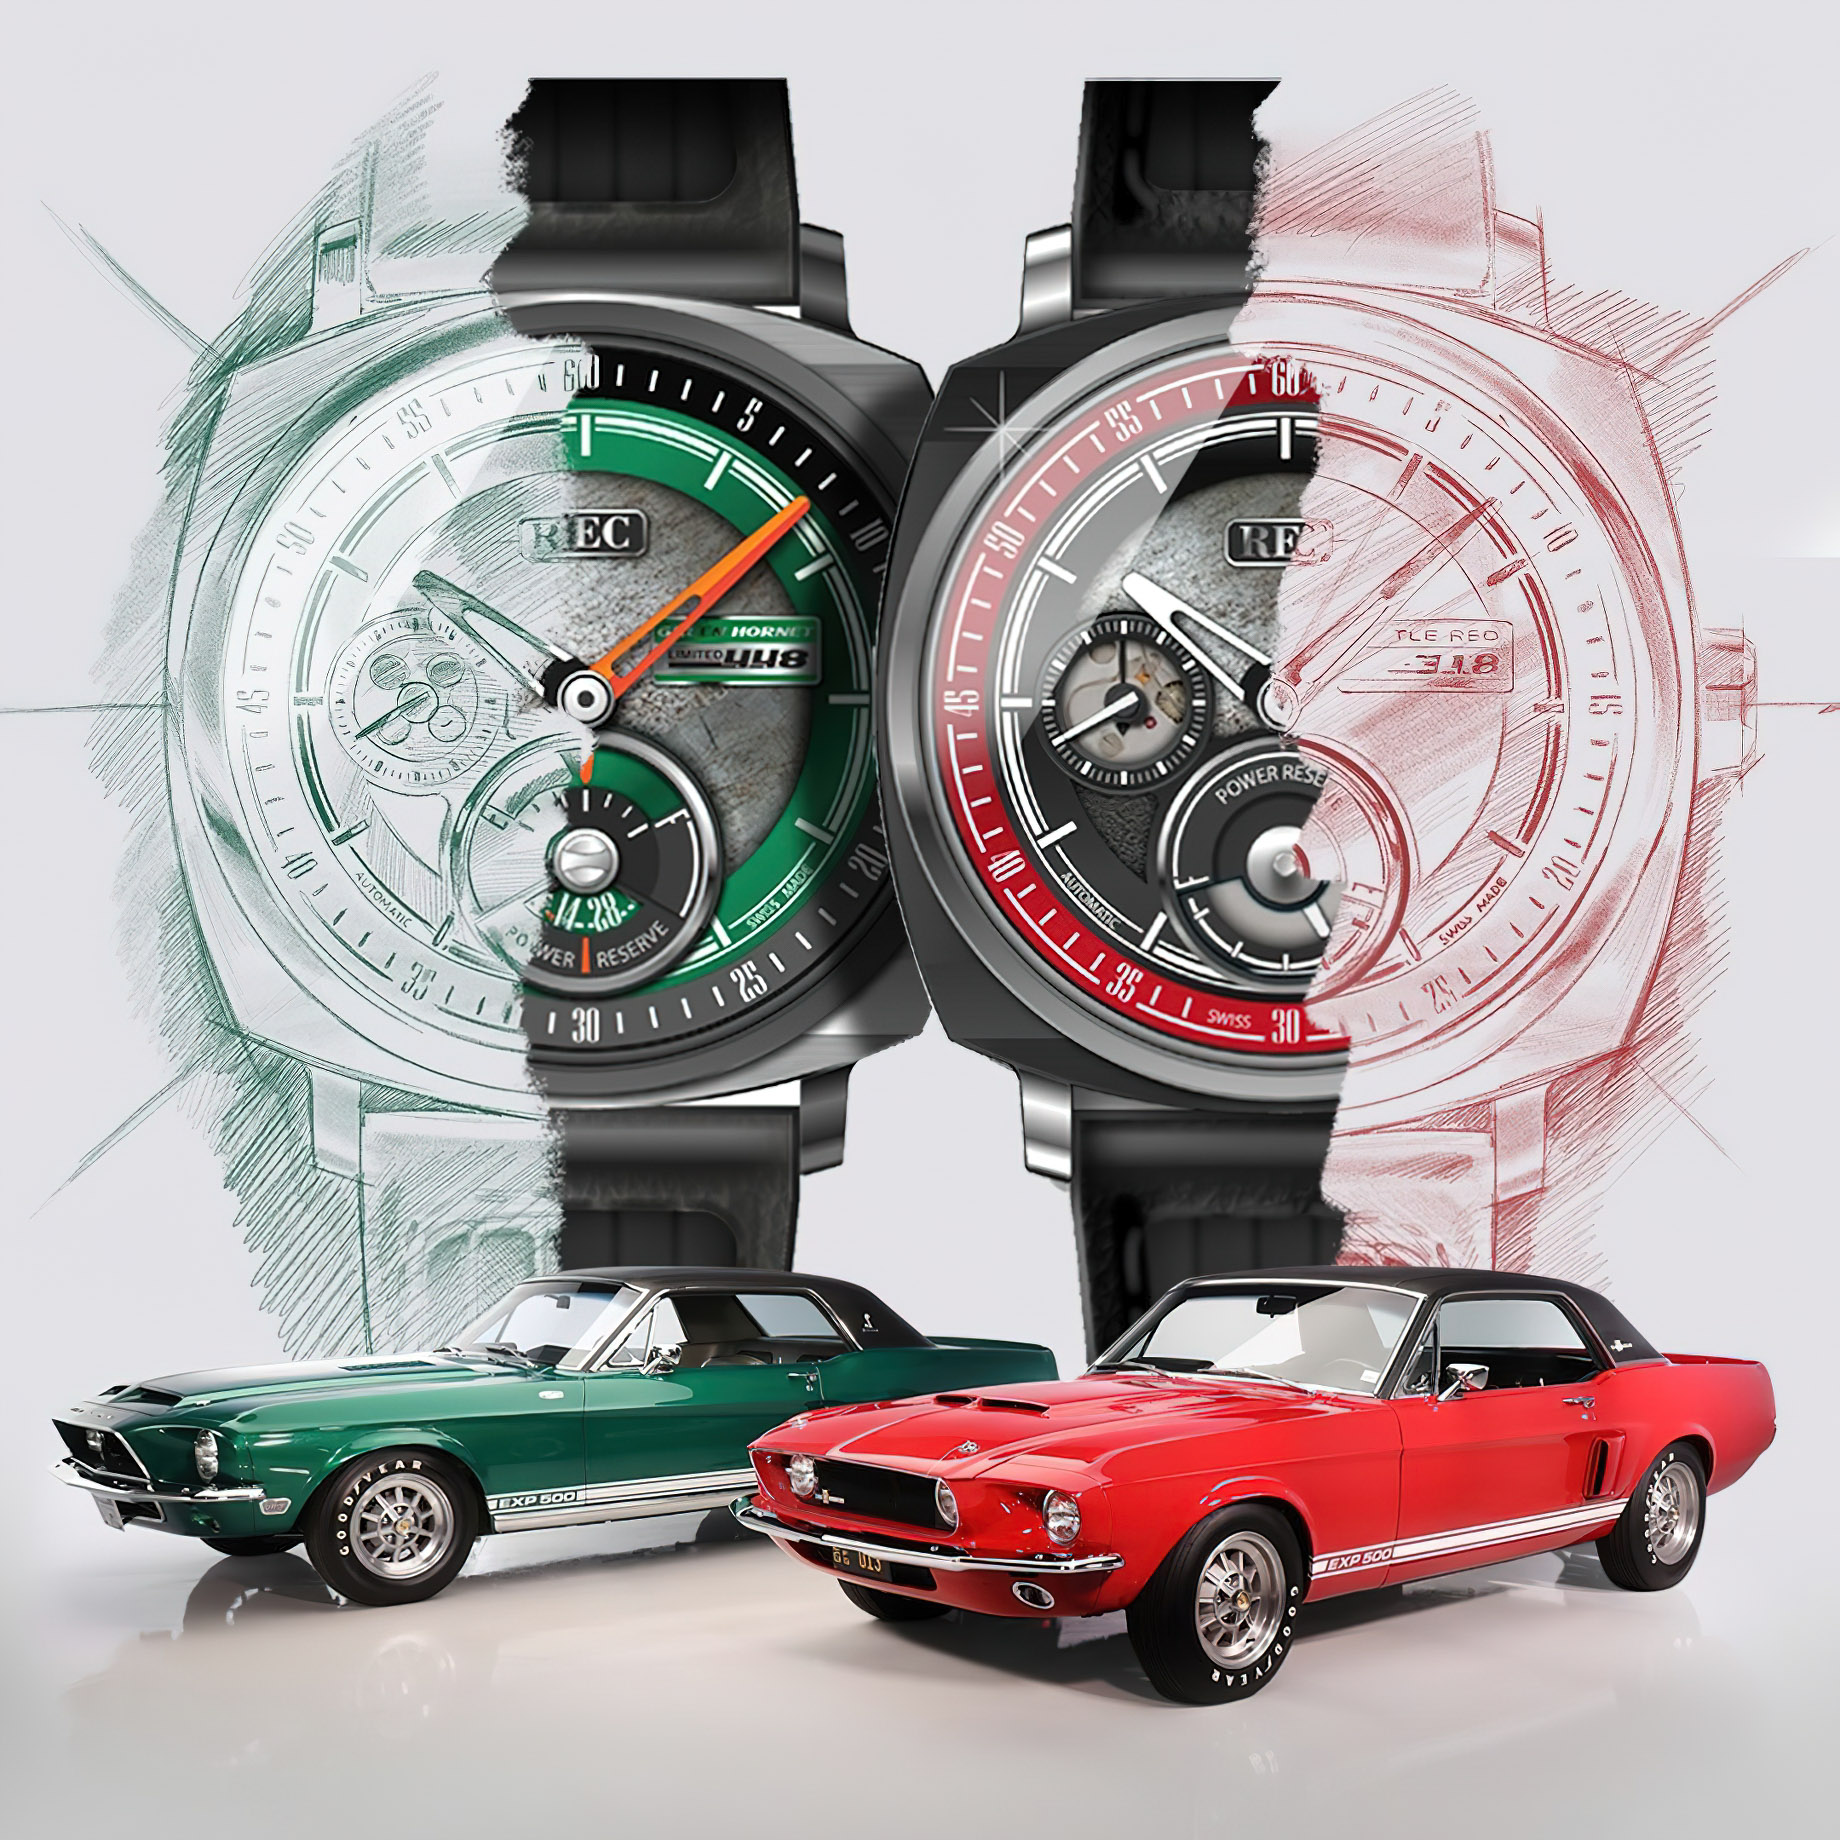 P-51 Green Hornet & Little Red Limited Collection - REC Watches